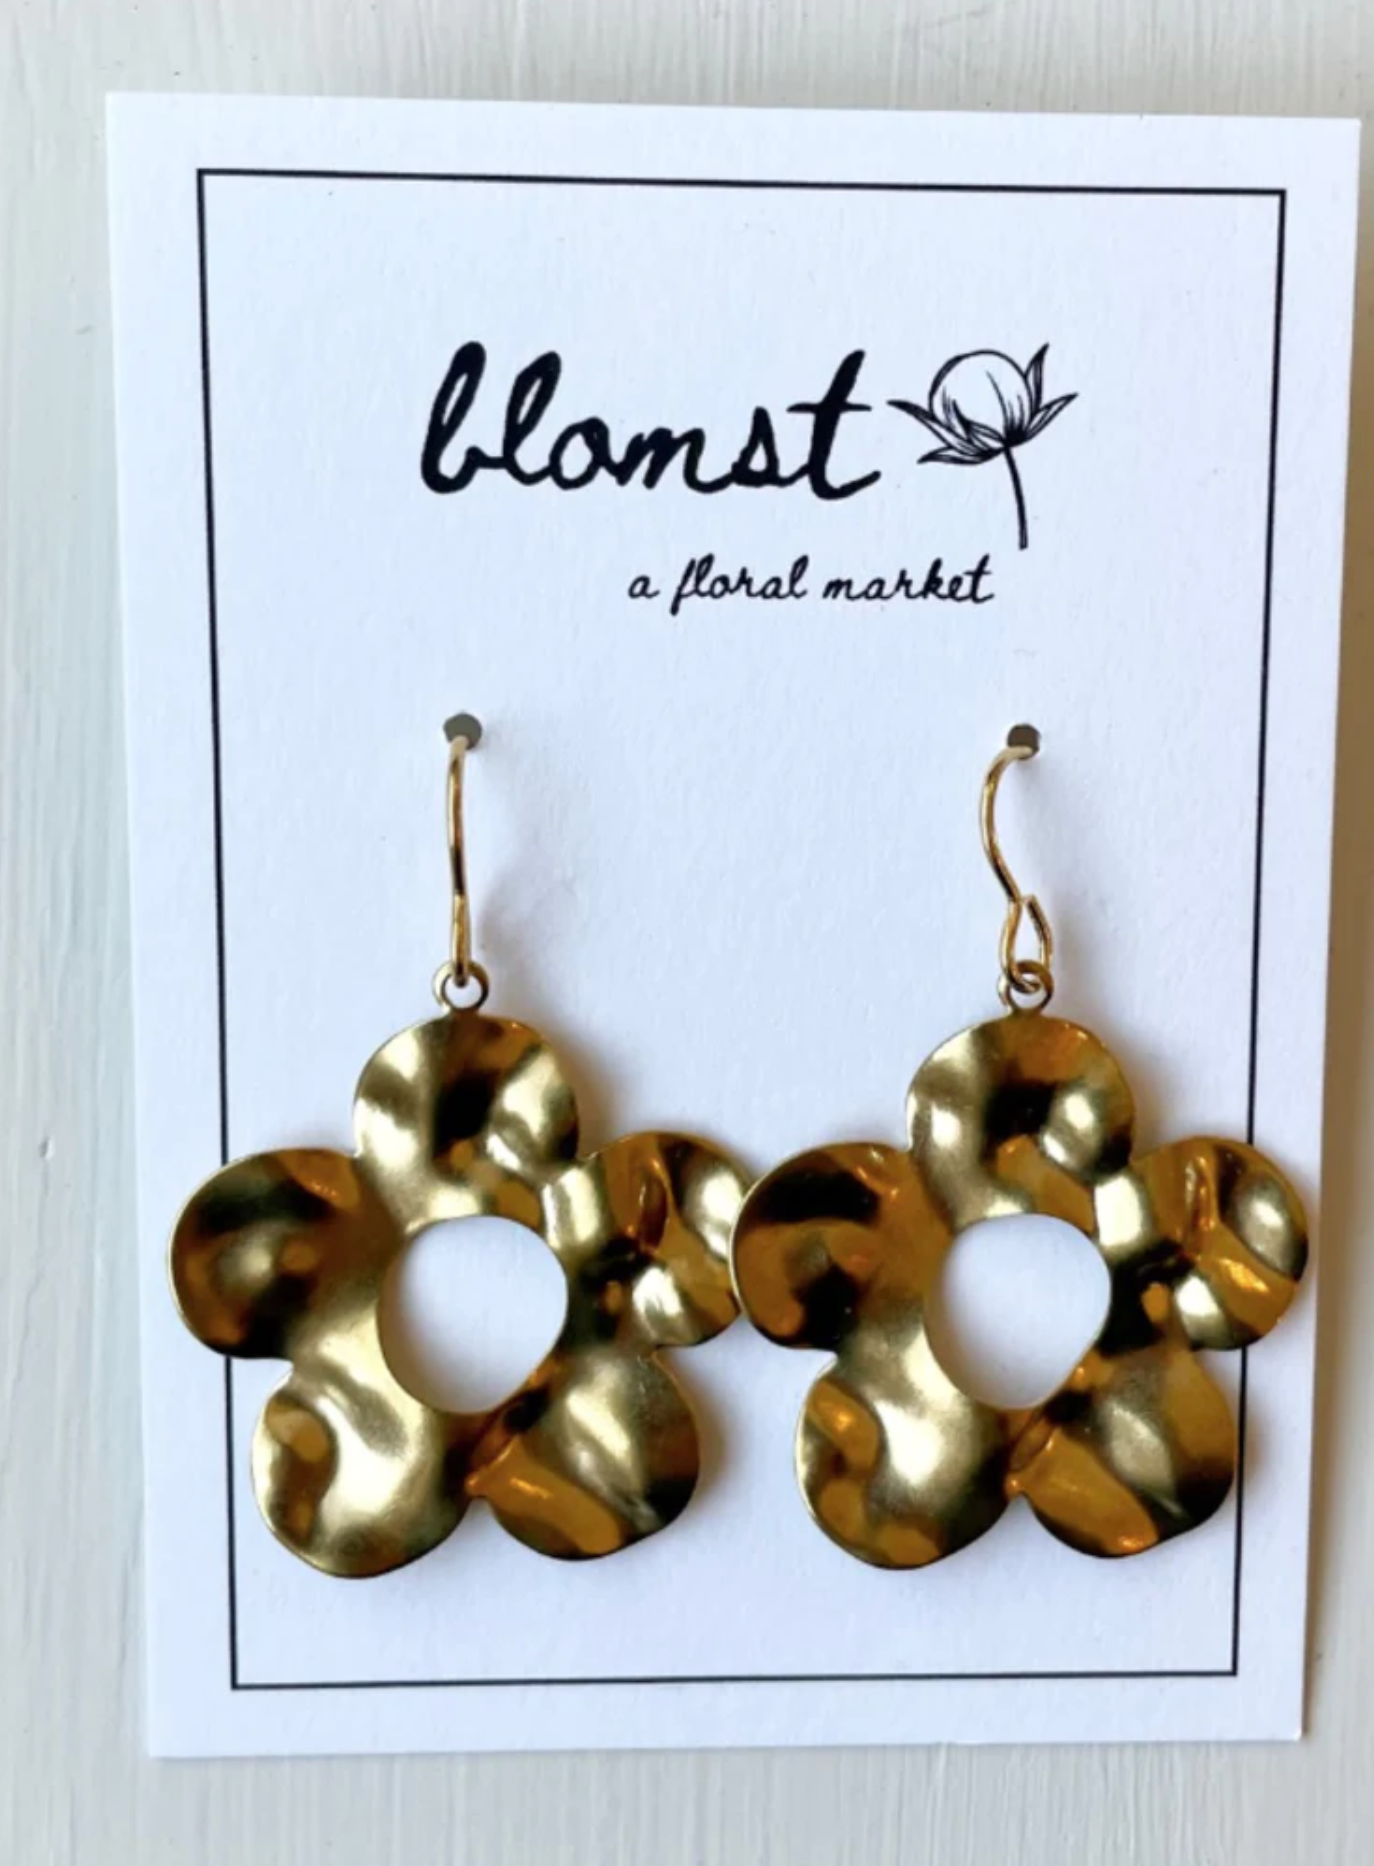 Hammered gold flower dangly earrings made by Blomst Floral Market